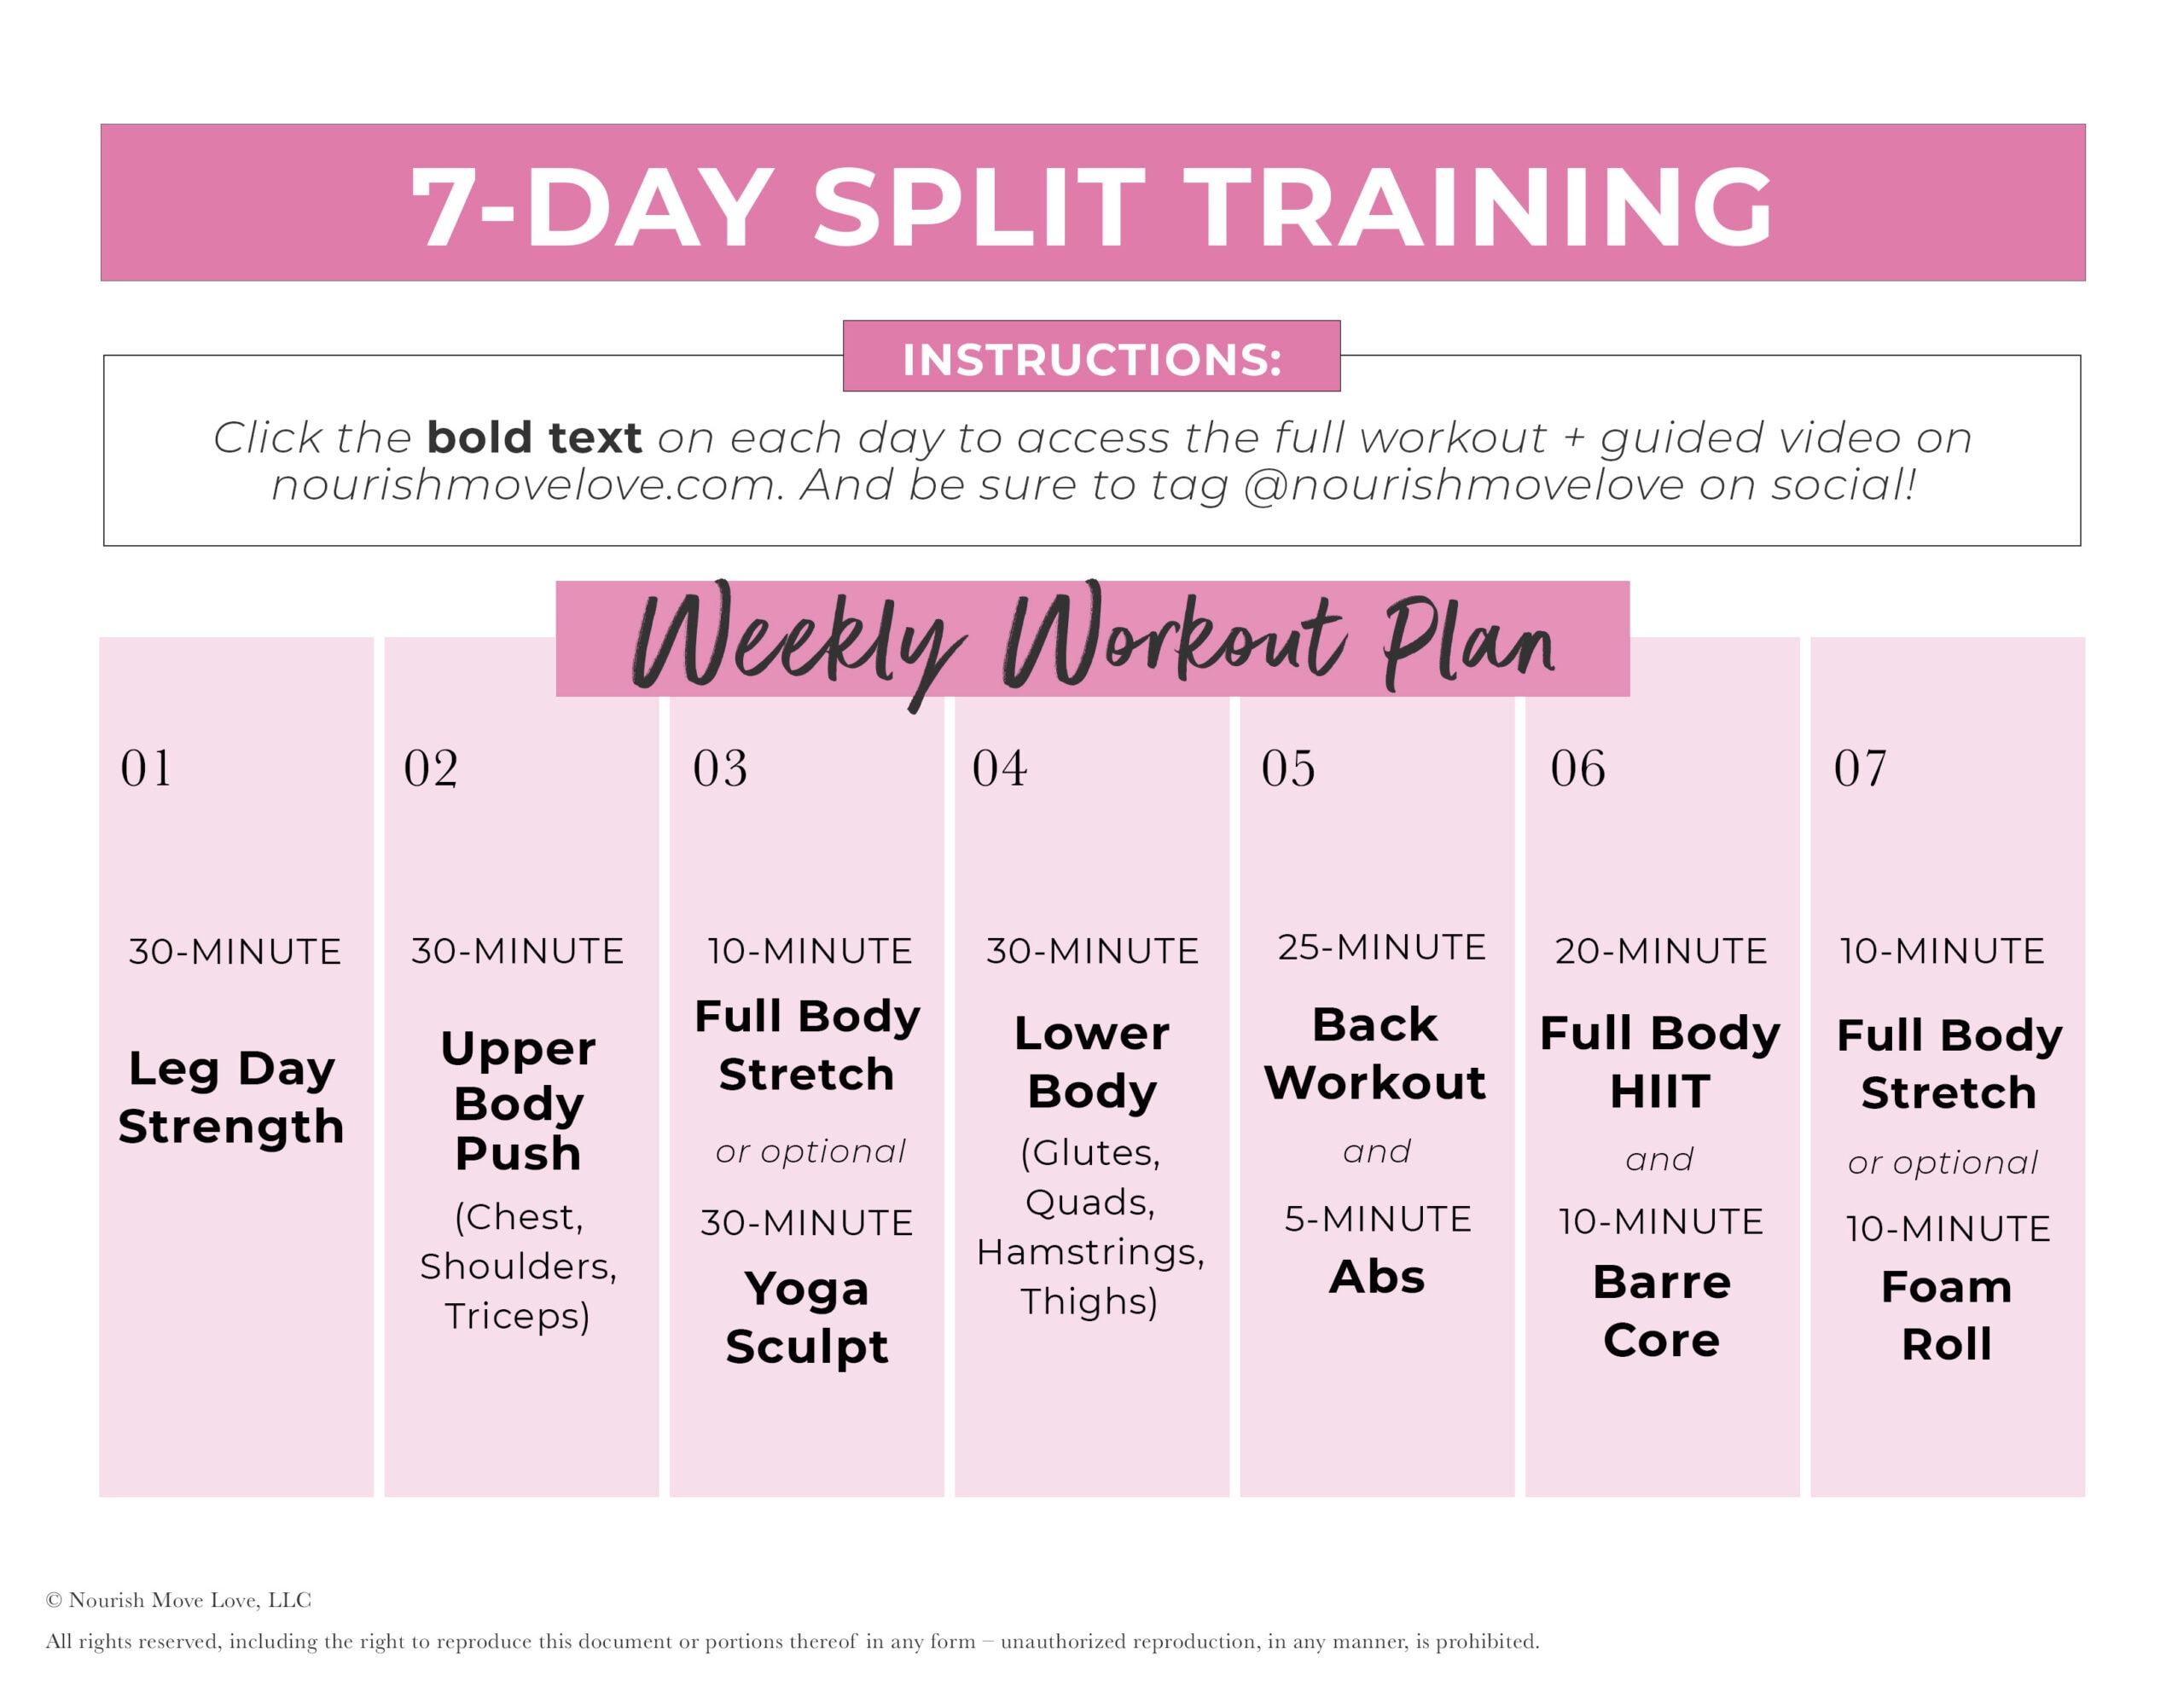 How To Plan A Weekly Workout Routine